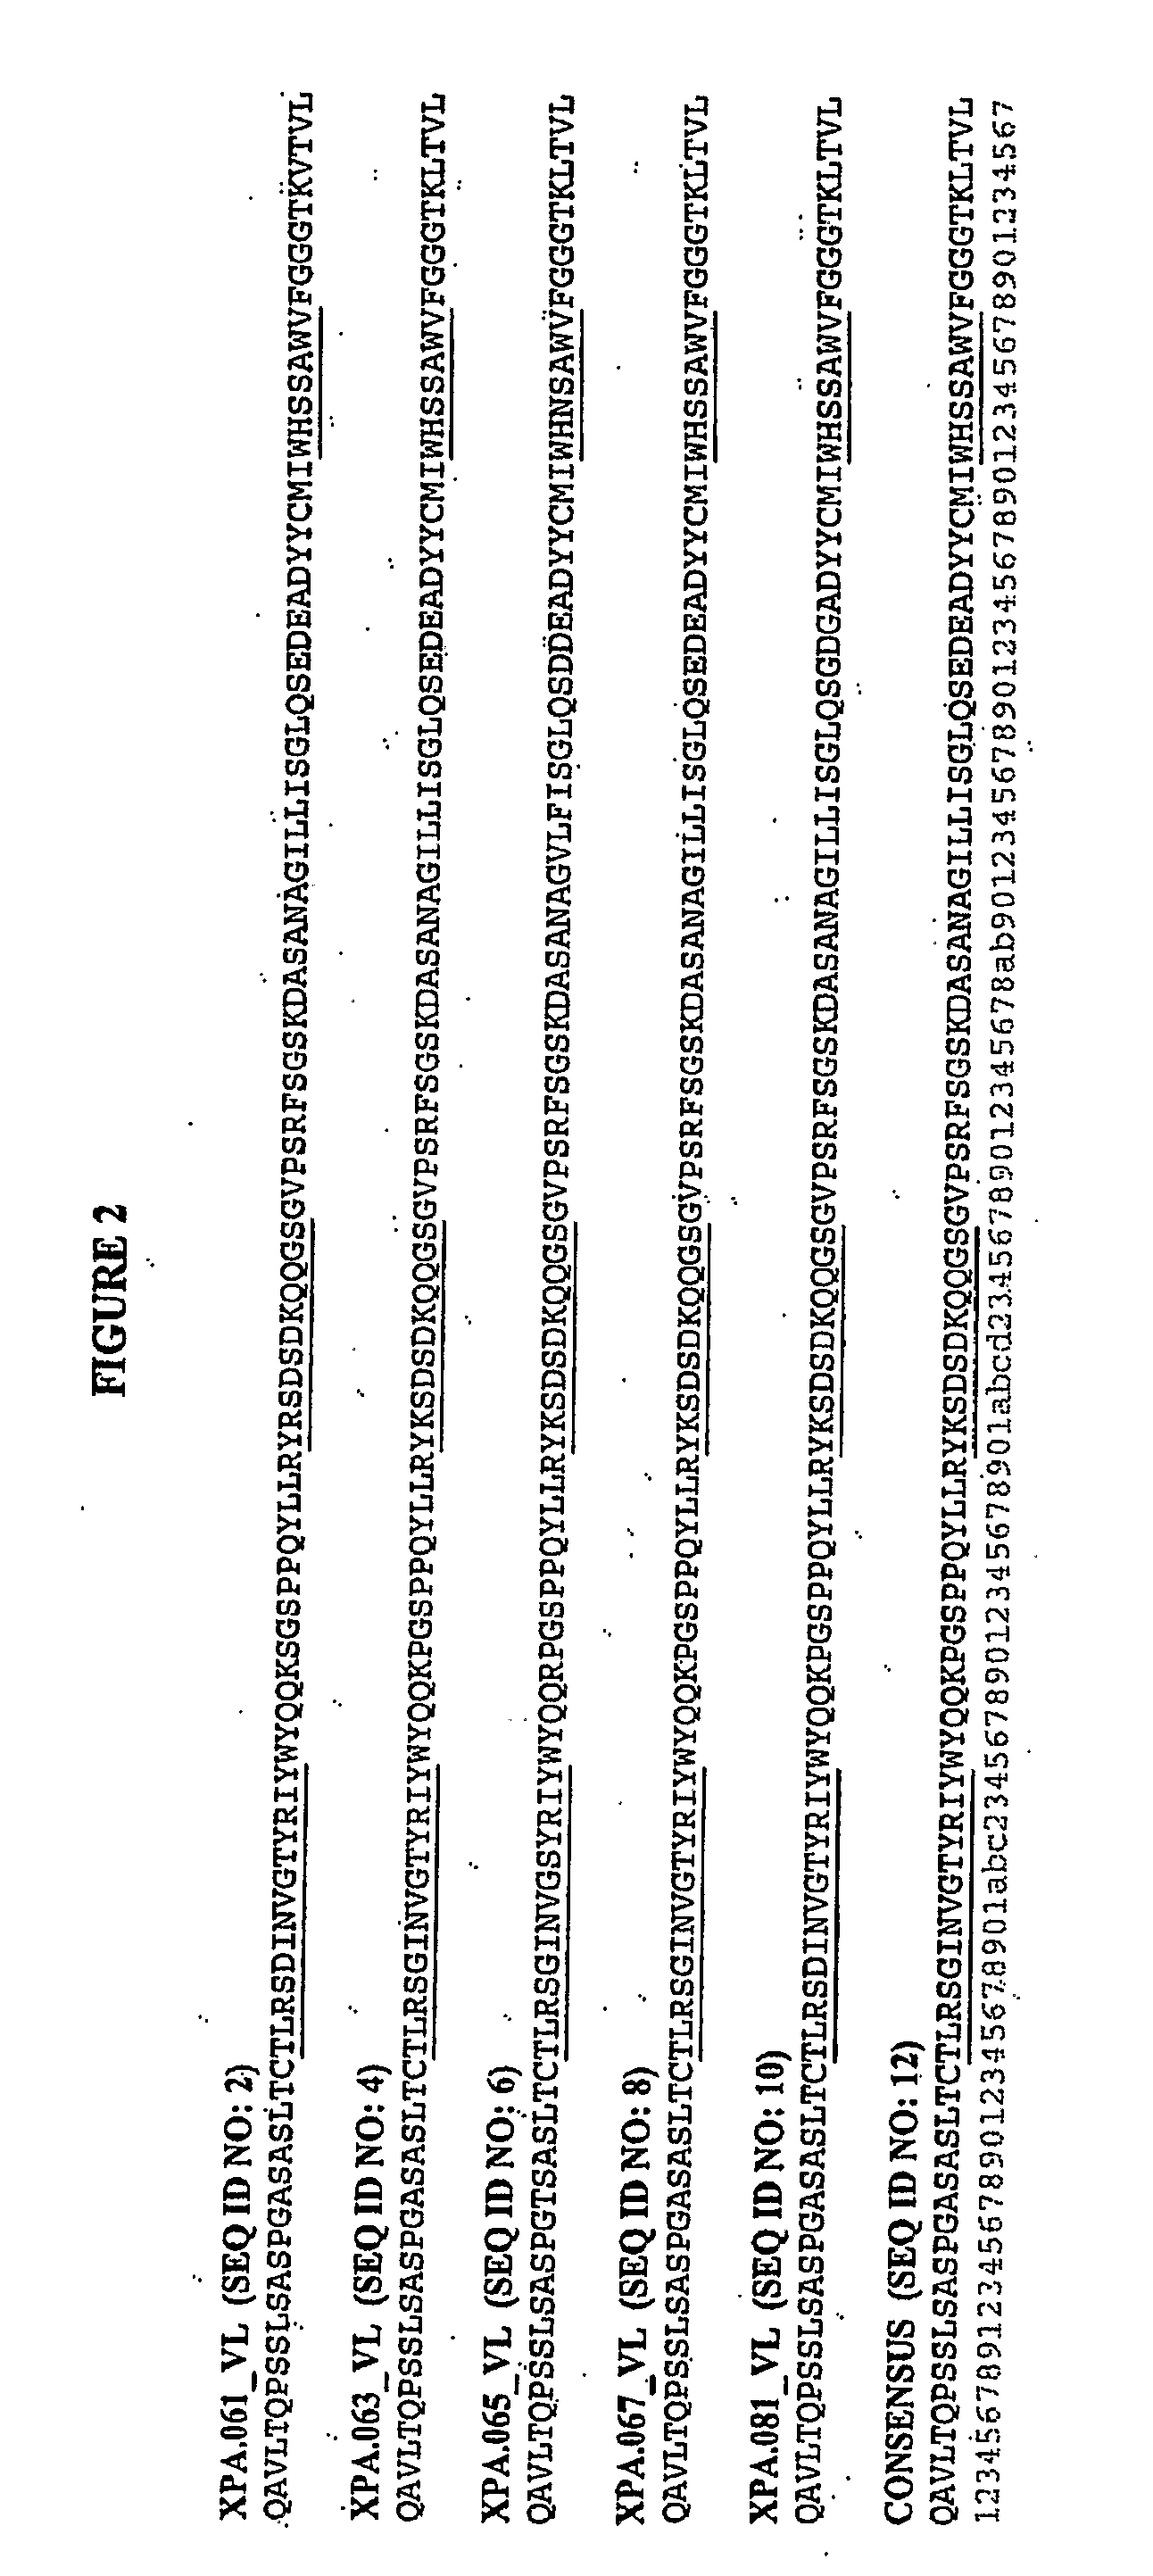 Human antibodies specific for gastrin materials and methods